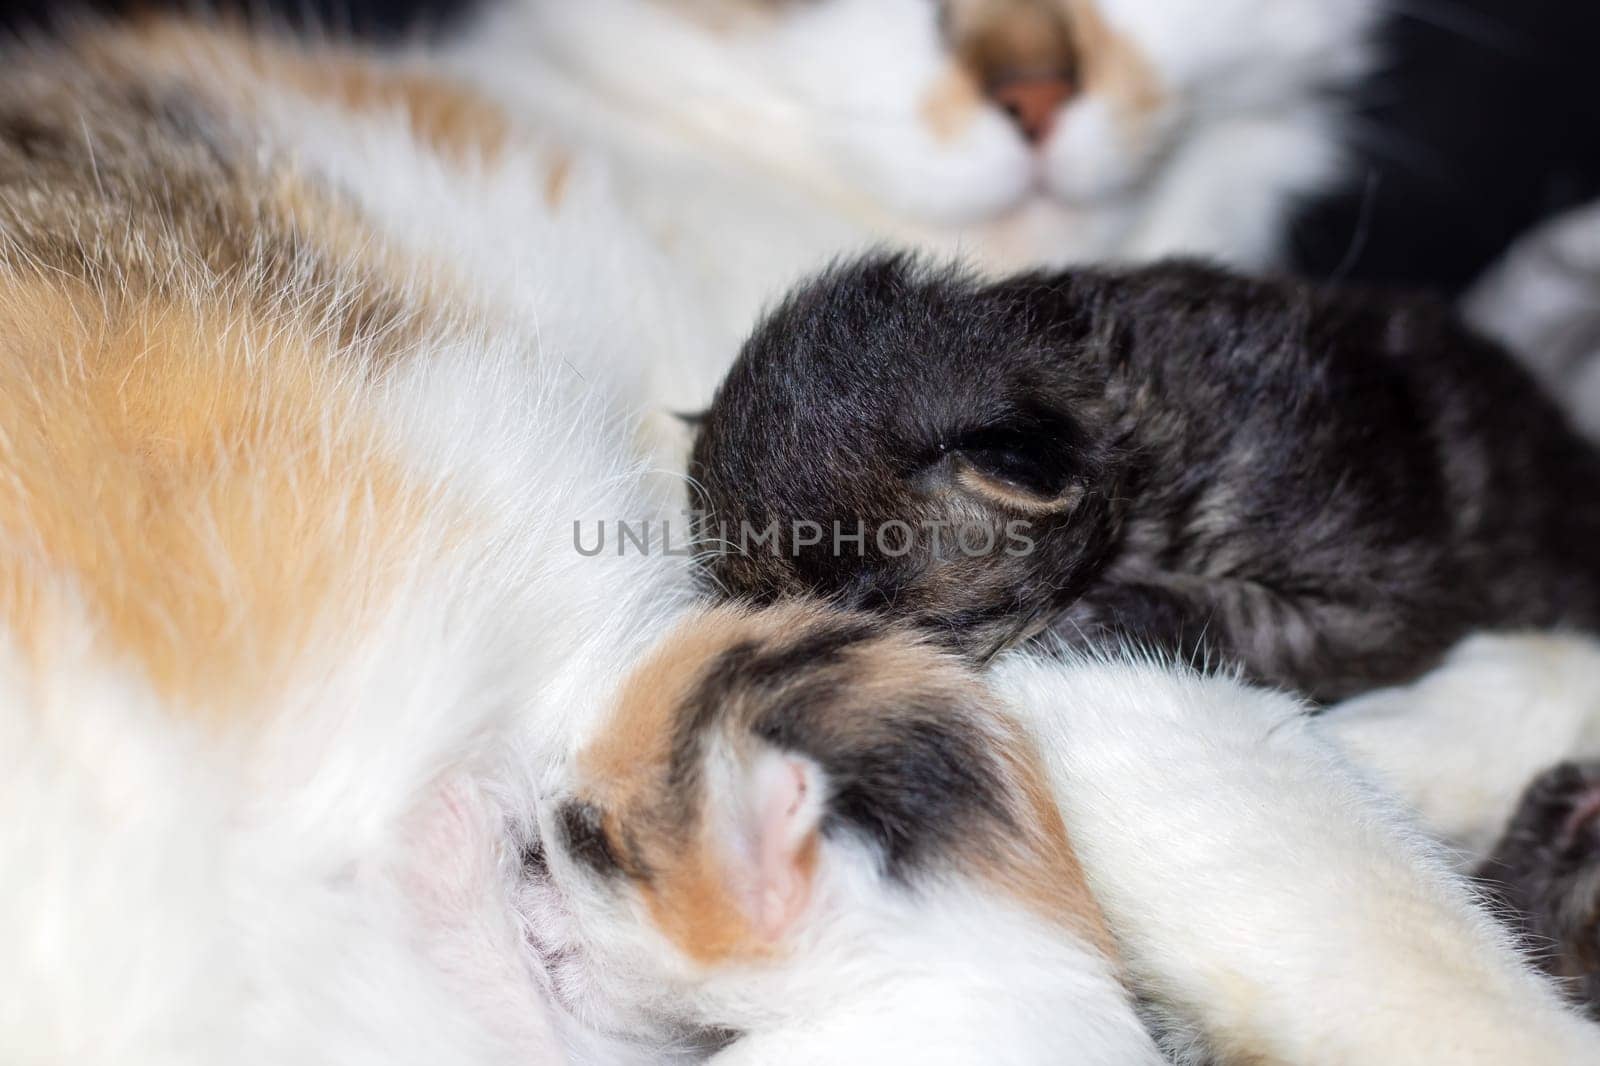 A small calico Felidae kitten with whiskers is nursing from its mothers breast while her tail sways. The closeup shot captures the fawn fur, tiny snout, and fluffy foam around her mouth